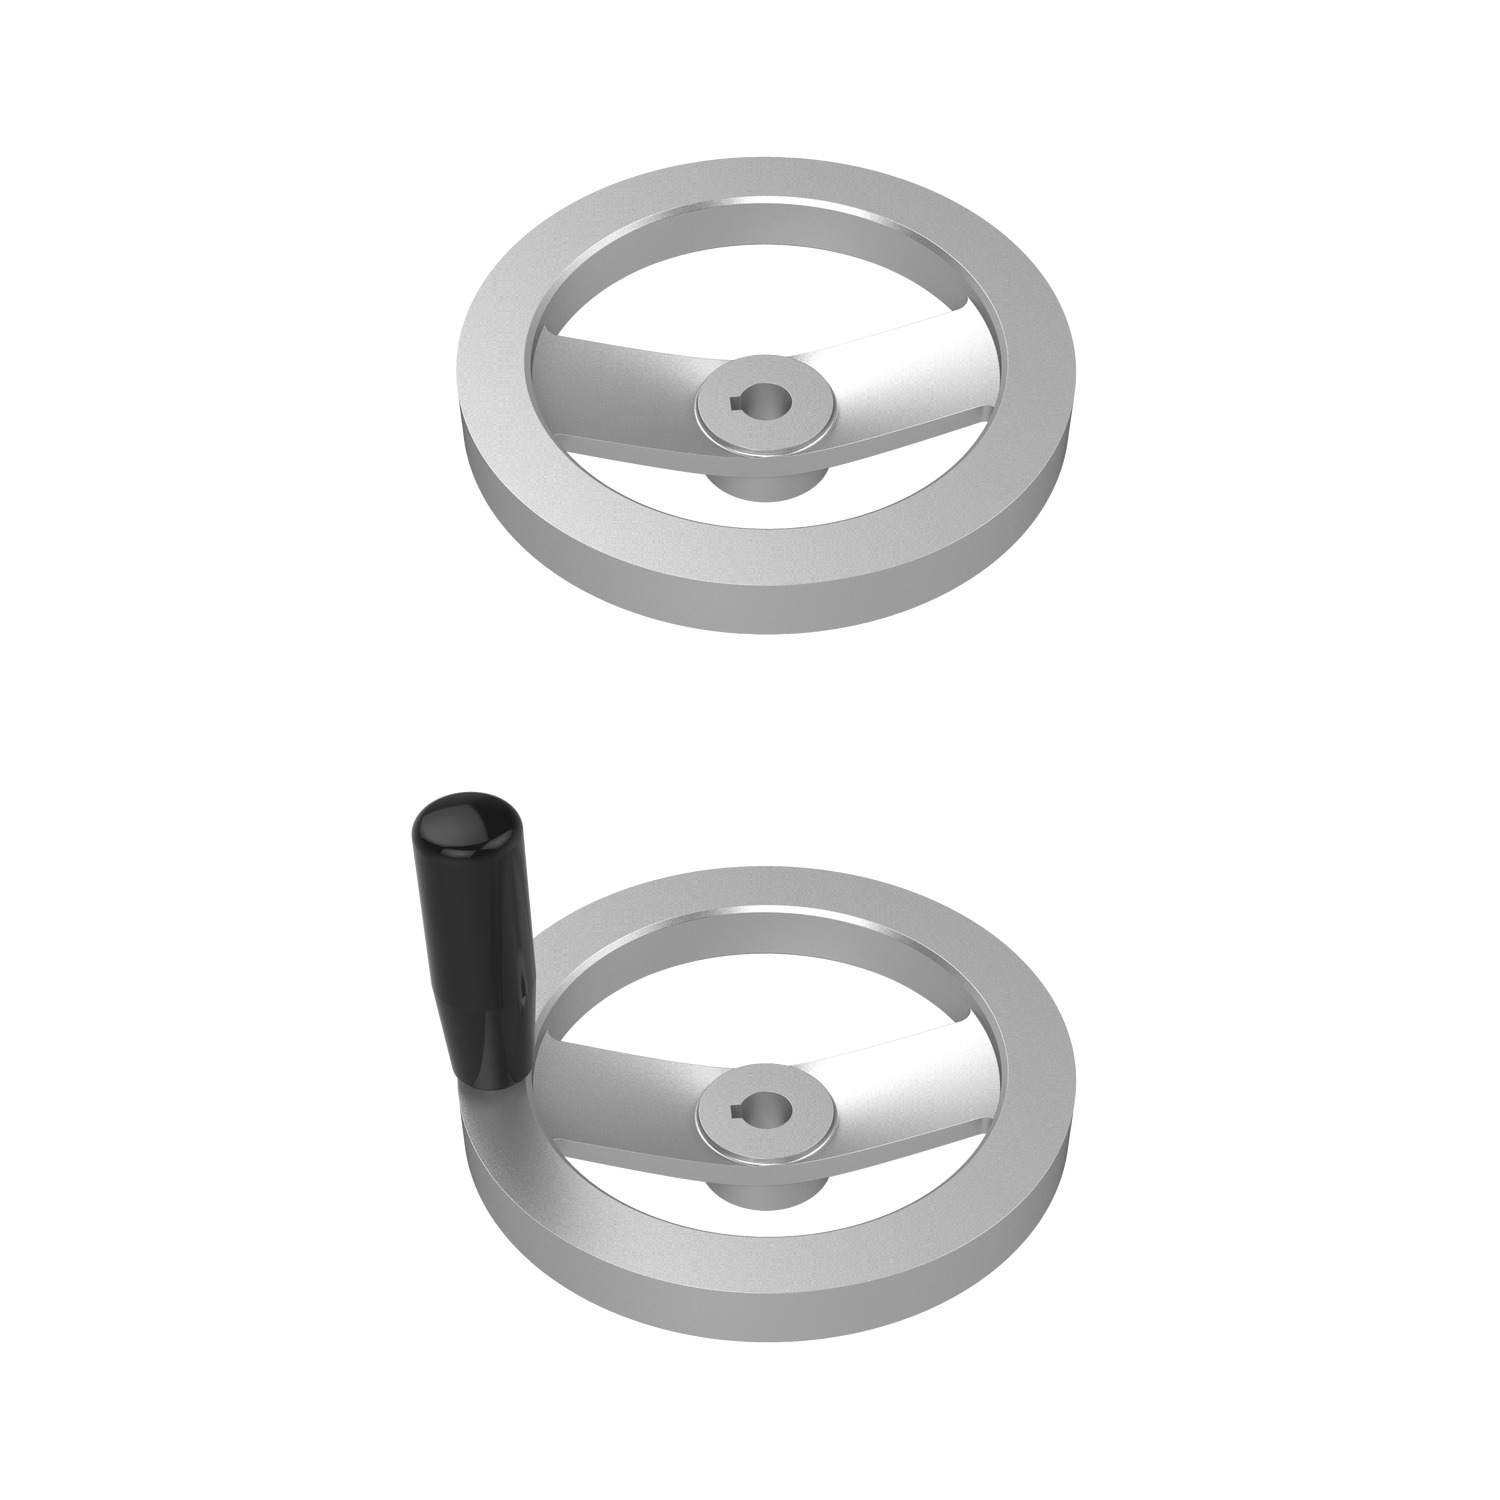 Handwheels - 2 Spoke 2-Spoke aluminium handwheels. Manufactured to DIN 7708. Available with and without keyway and handle.